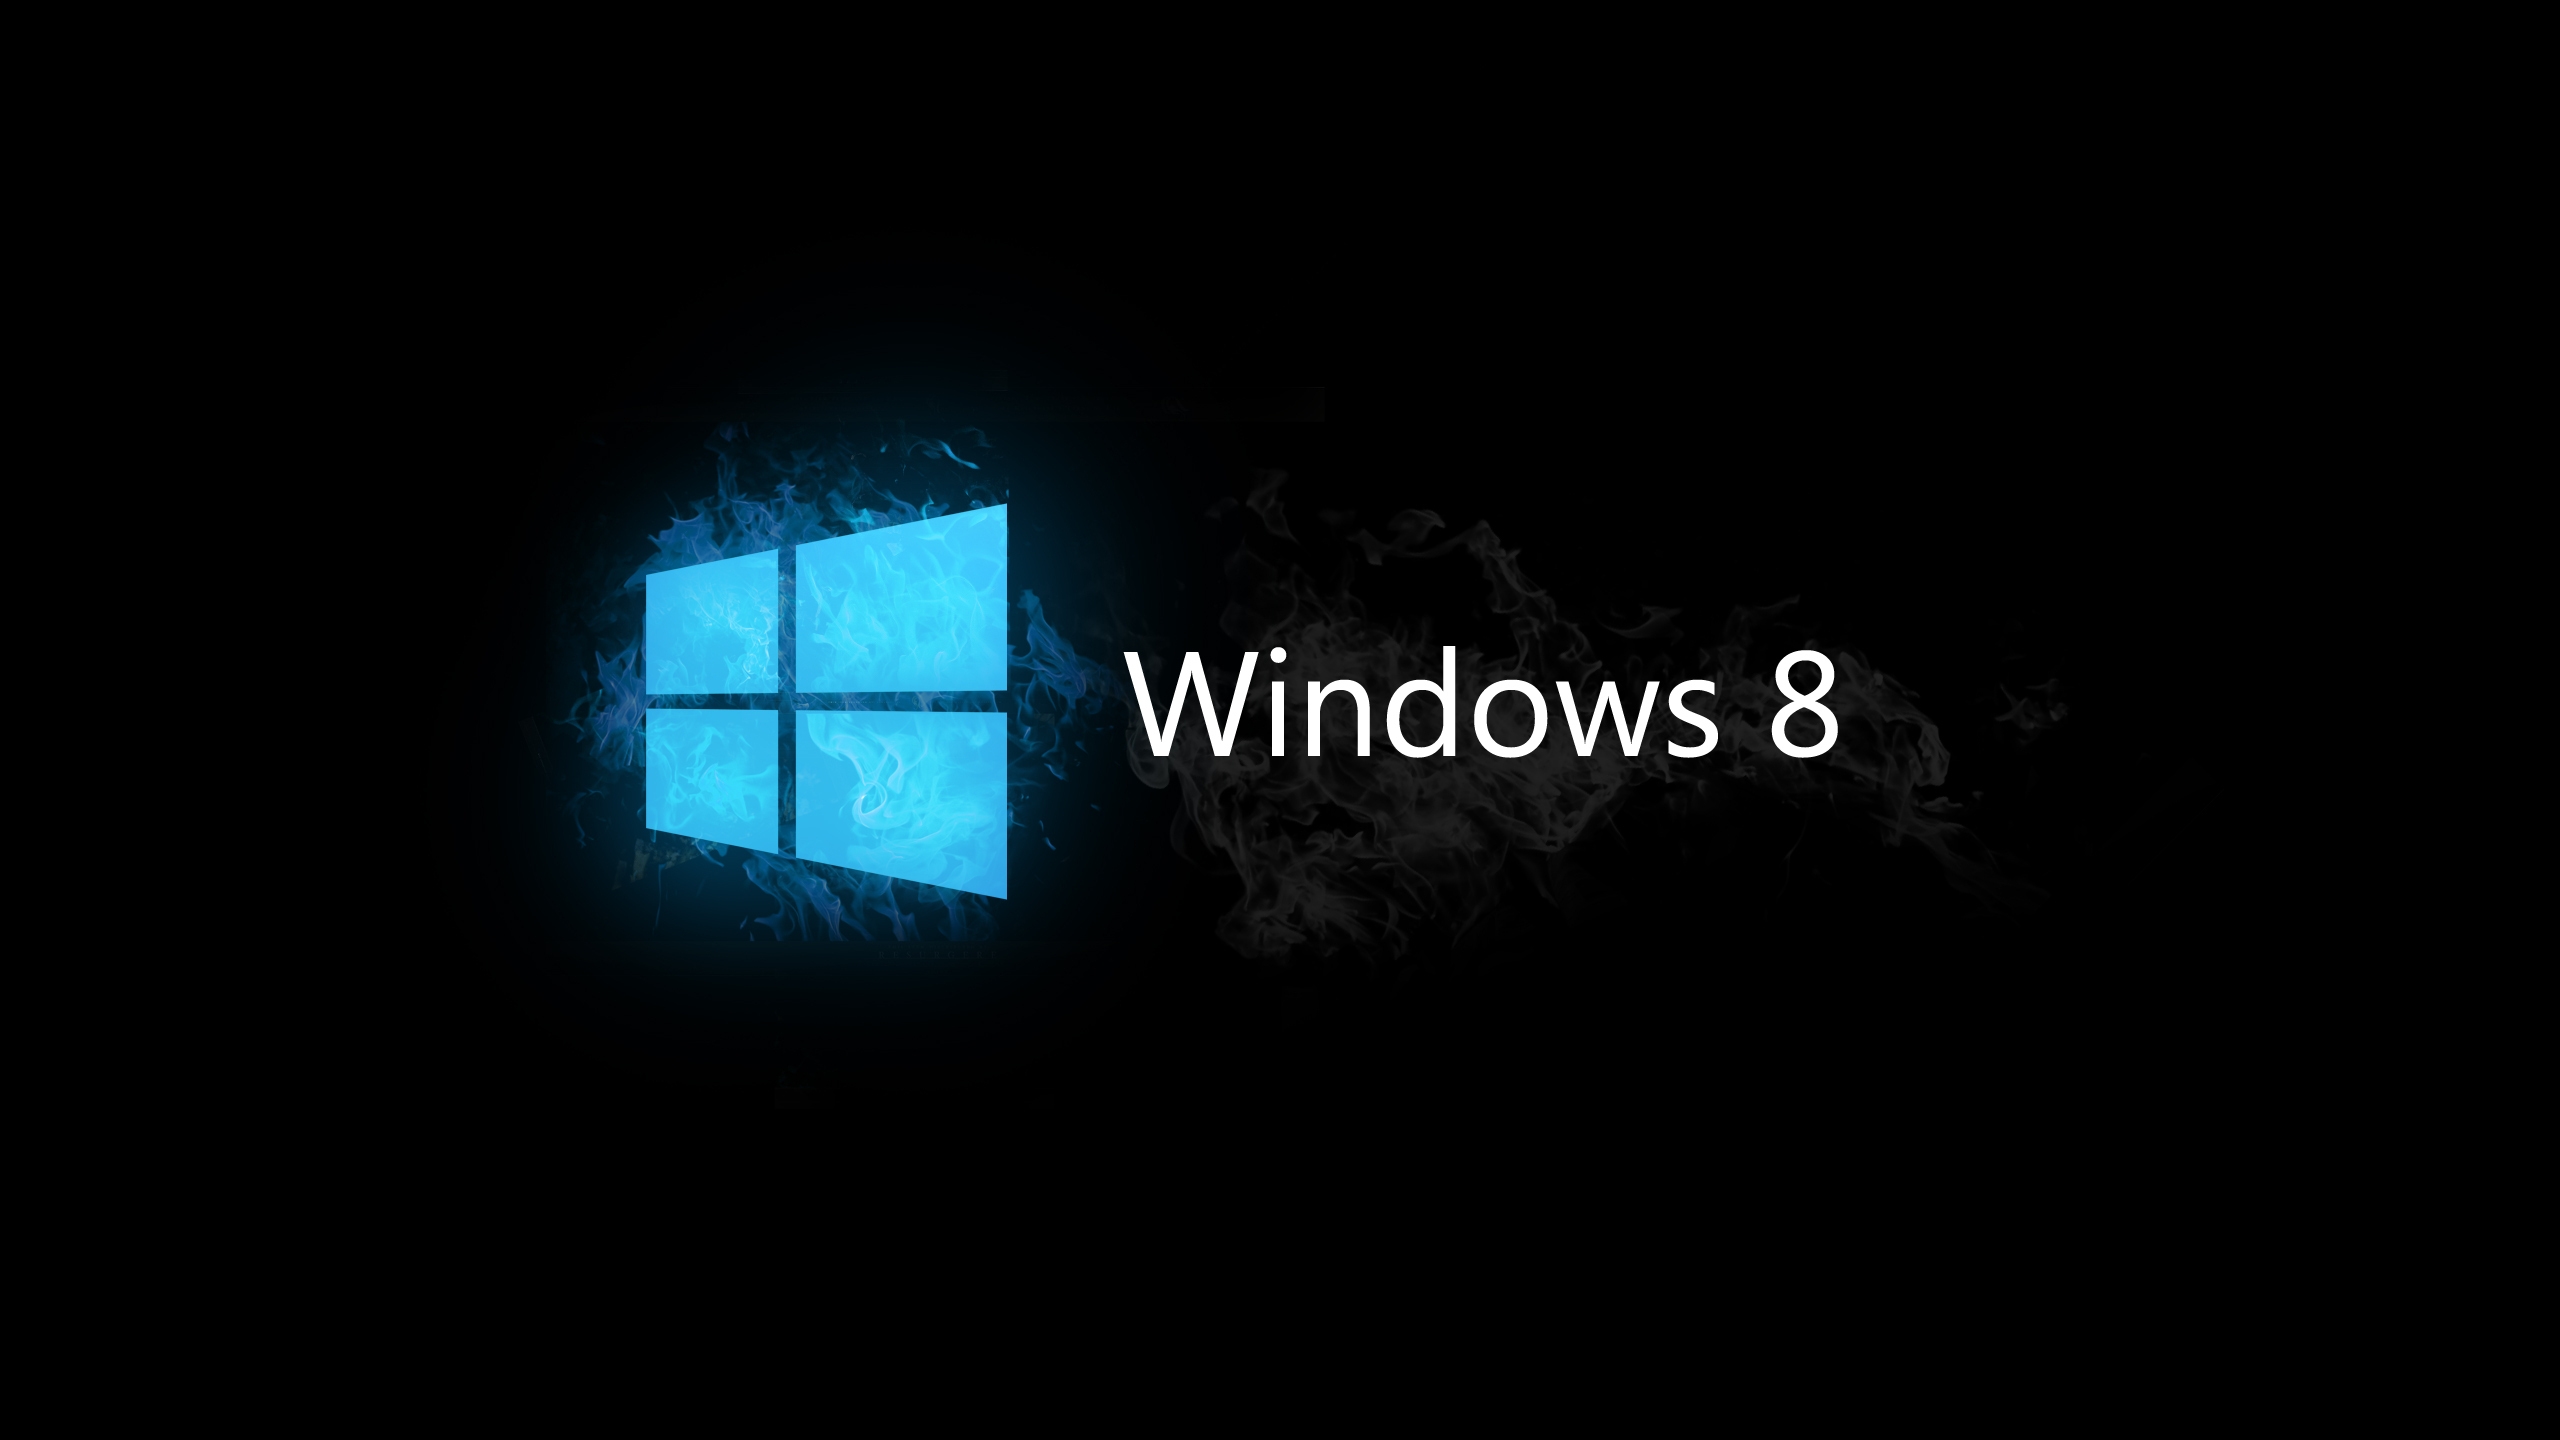 Windows 8 Blue and Black for 2560x1440 HDTV resolution